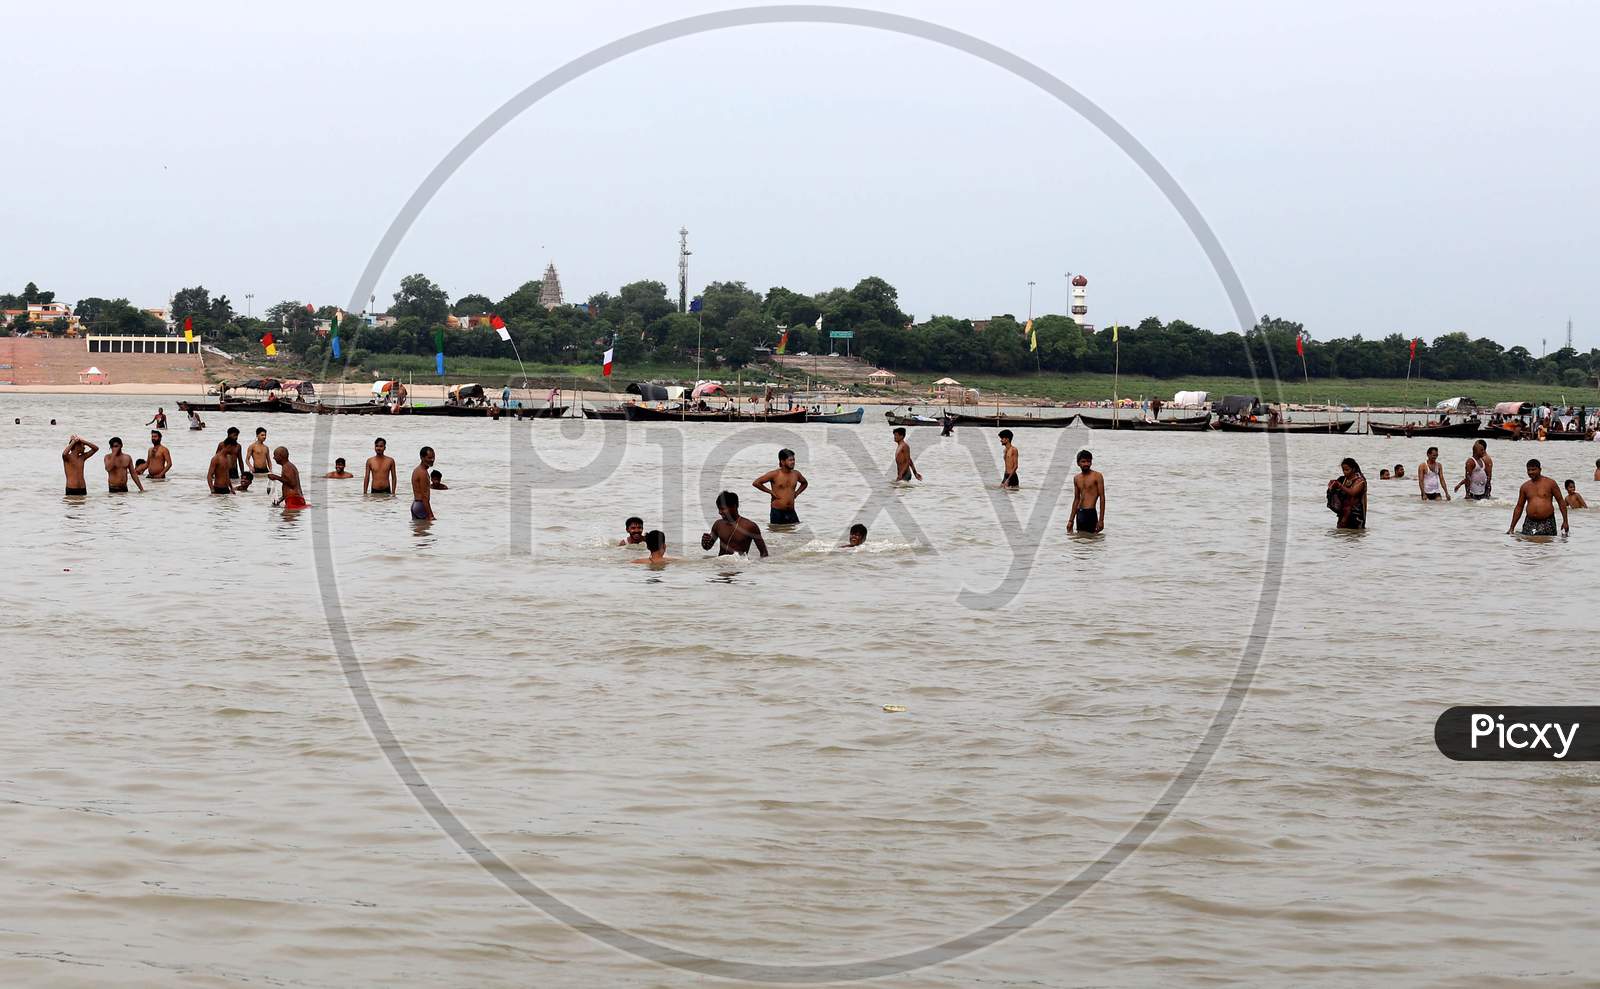 Devotees take a dip in the Holy River Ganga on the first Monday of the holy month of Shravan in Prayagraj, Uttar Pradesh on July 13, 2020